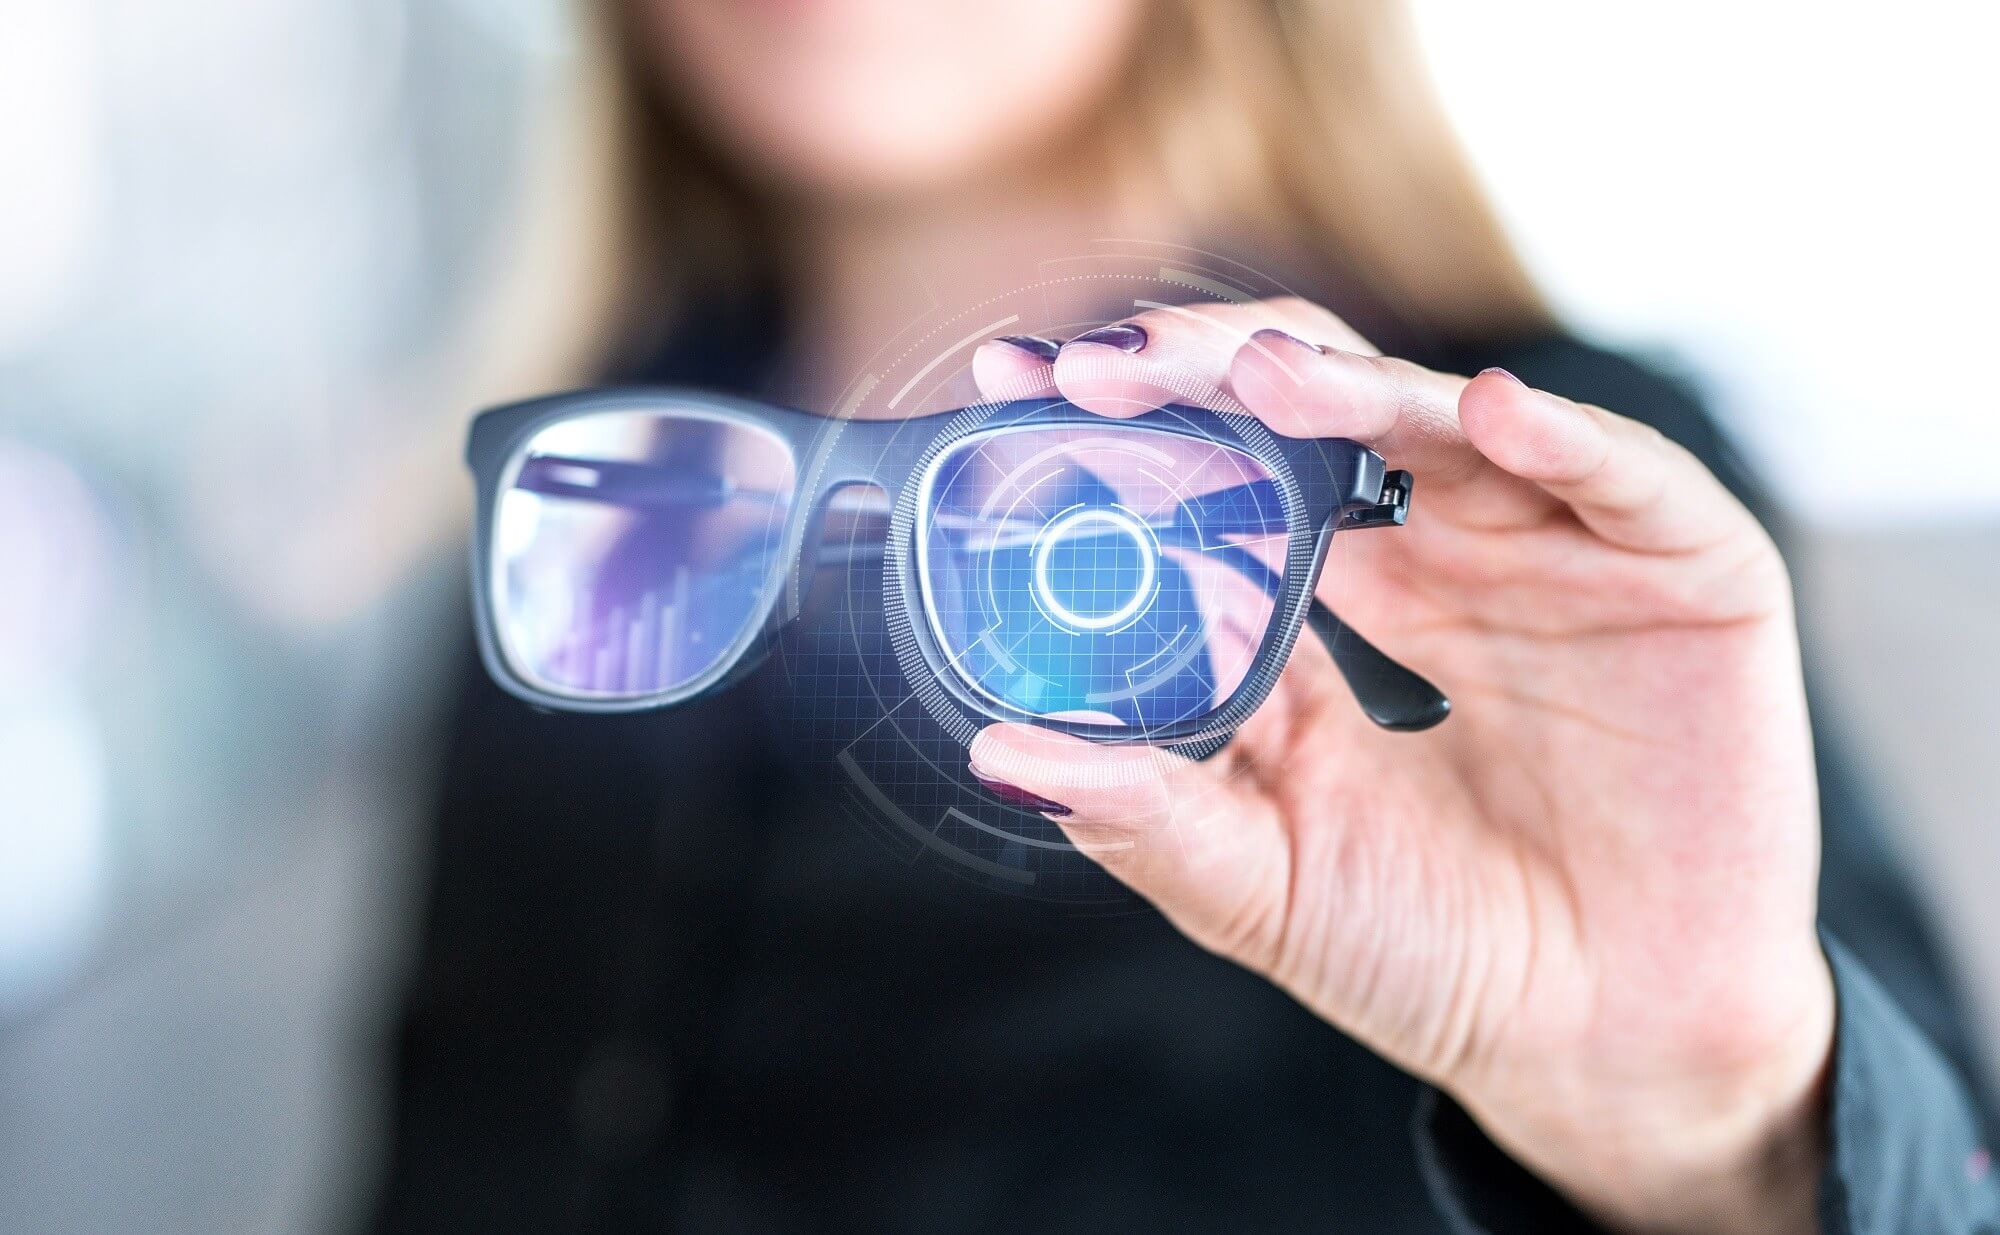 Apple's iPhone-powered AR glasses reportedly set to launch in 2020